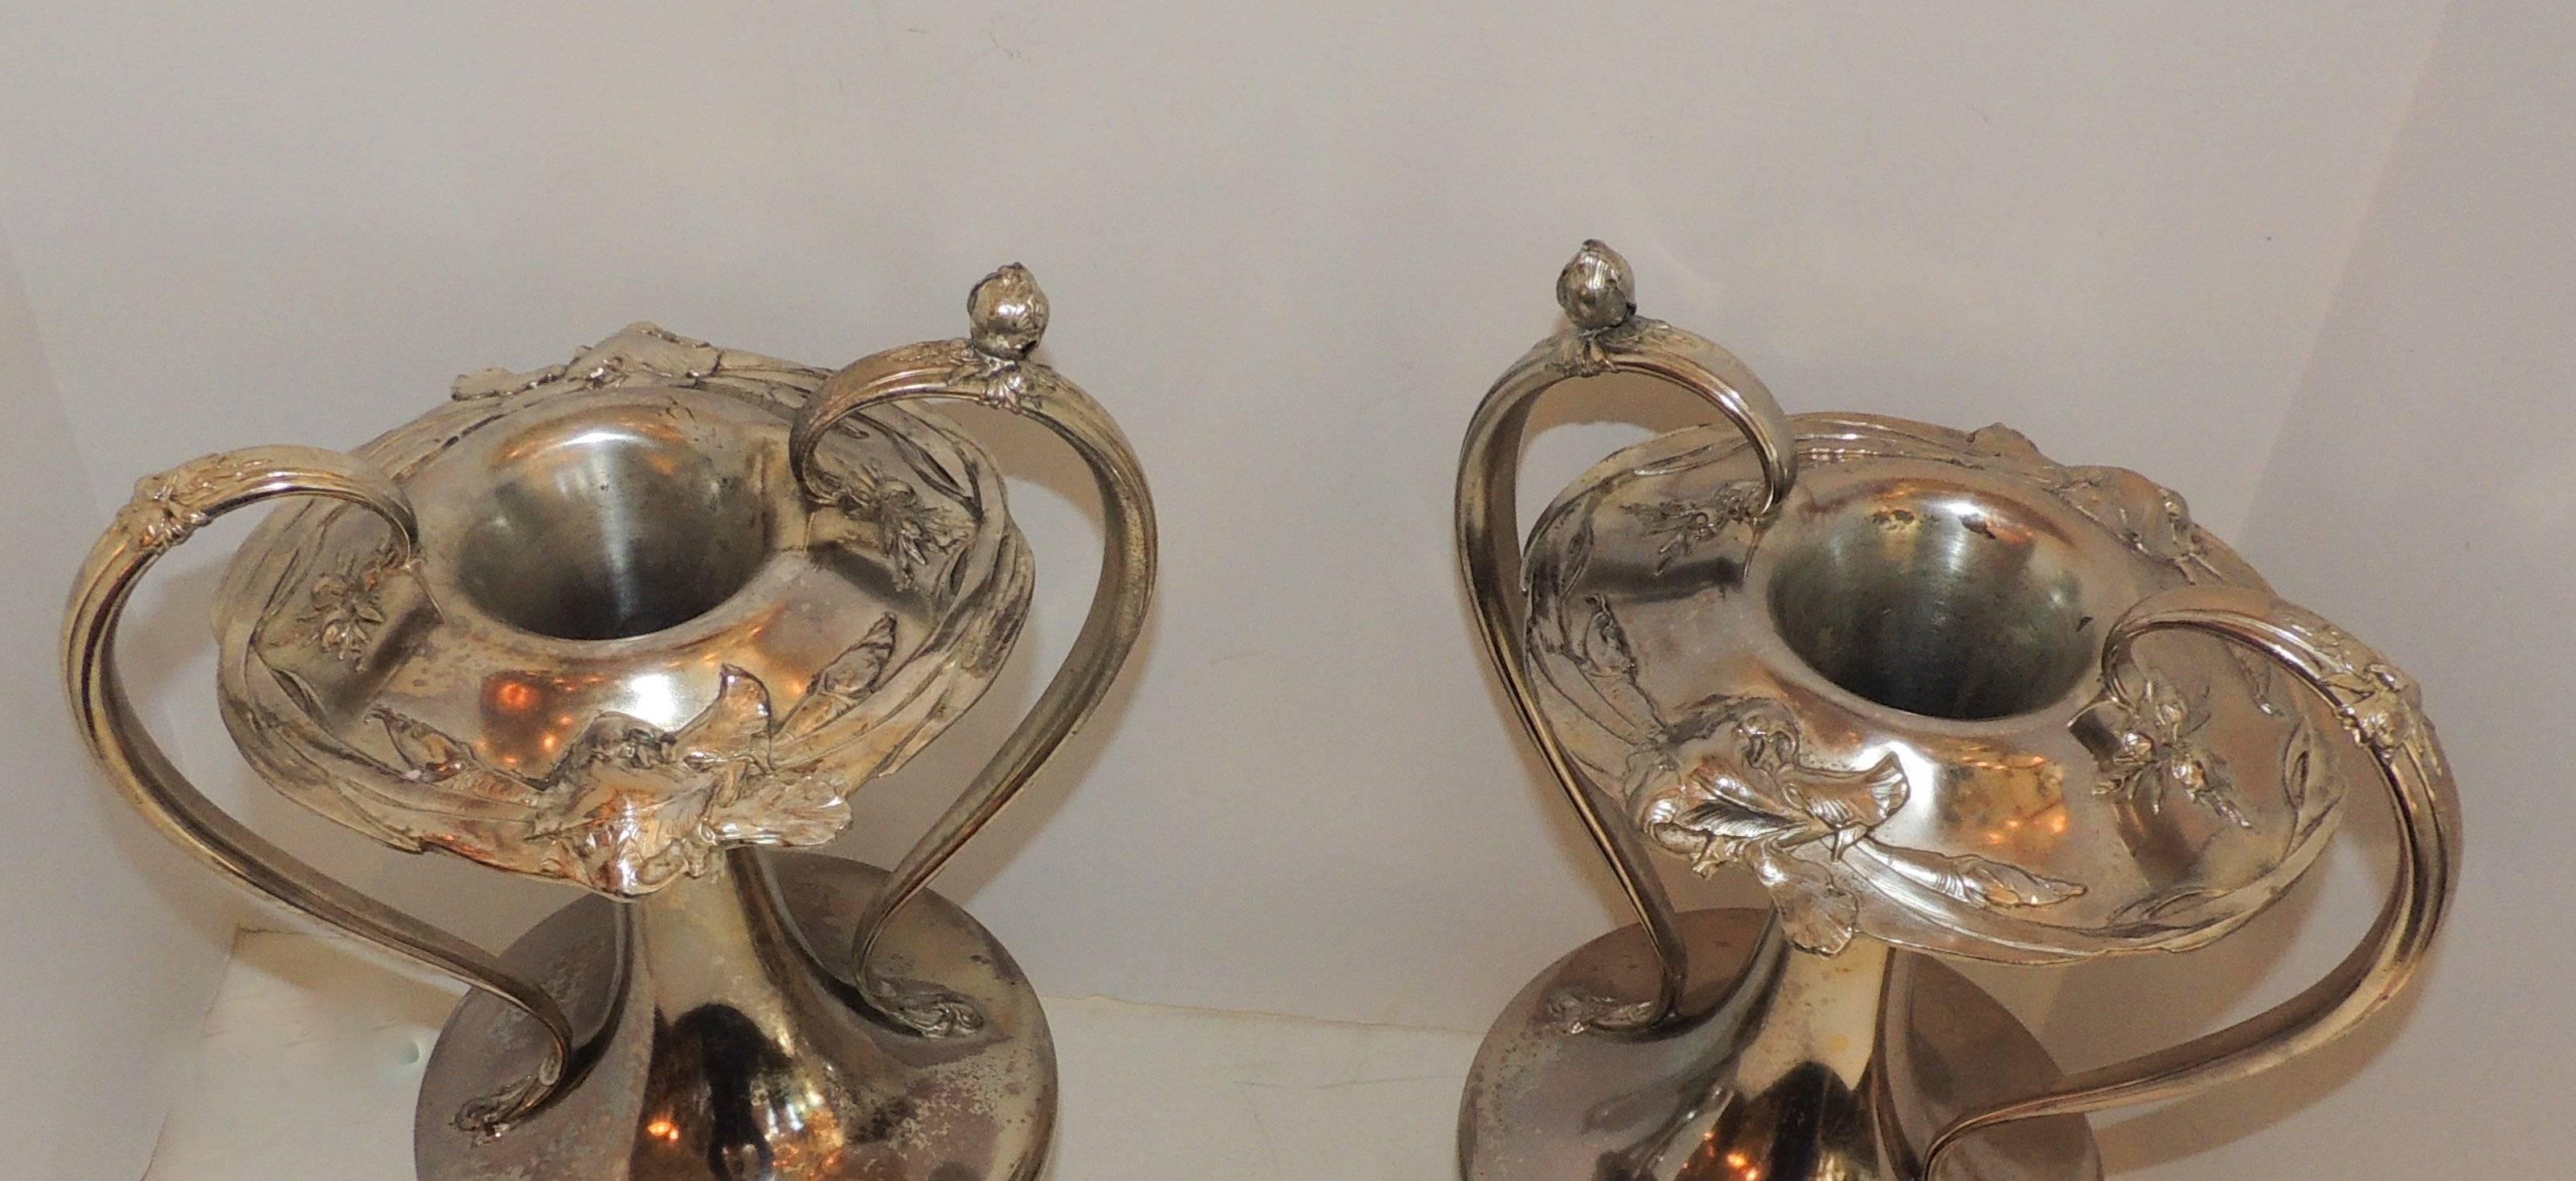 Large Pair of Reed & Barton Art Nouveau Silver Plate Urn Handle Vases WMF Urns In Good Condition For Sale In Roslyn, NY